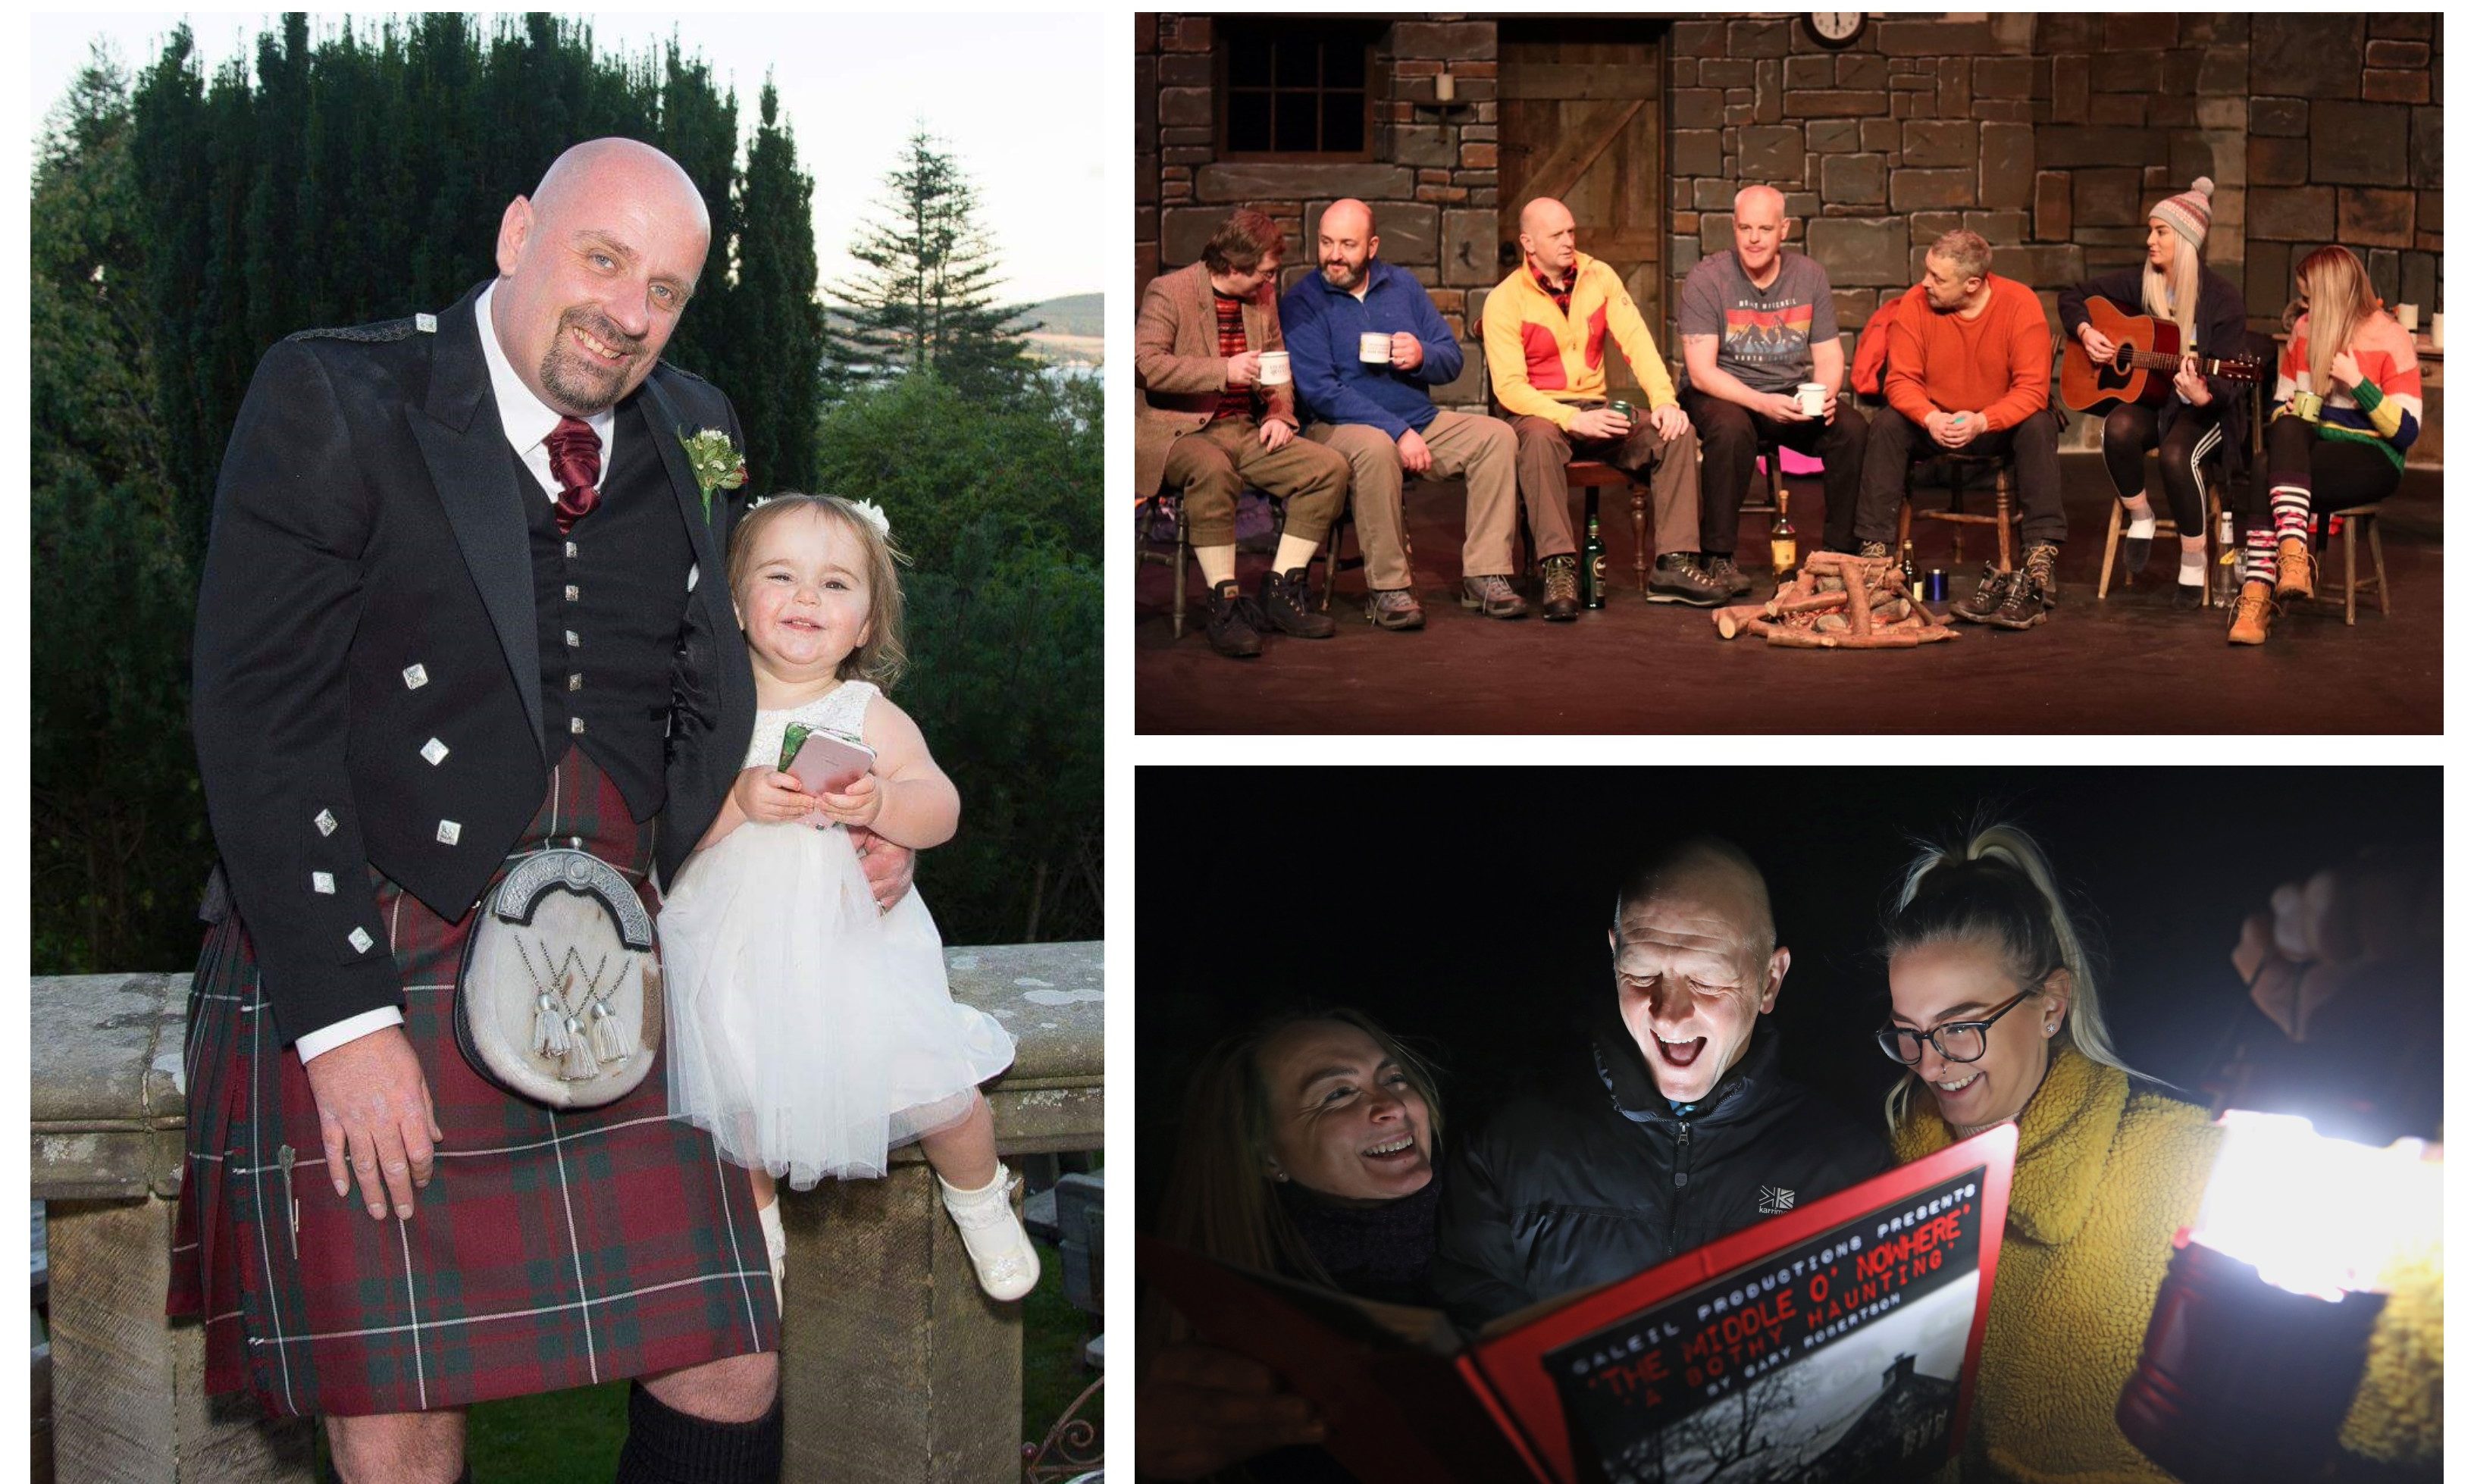 Scott Petrie with granddaughter Grace (left) and the cast of Middle O' Nowhere: A Bothy Haunting (right).